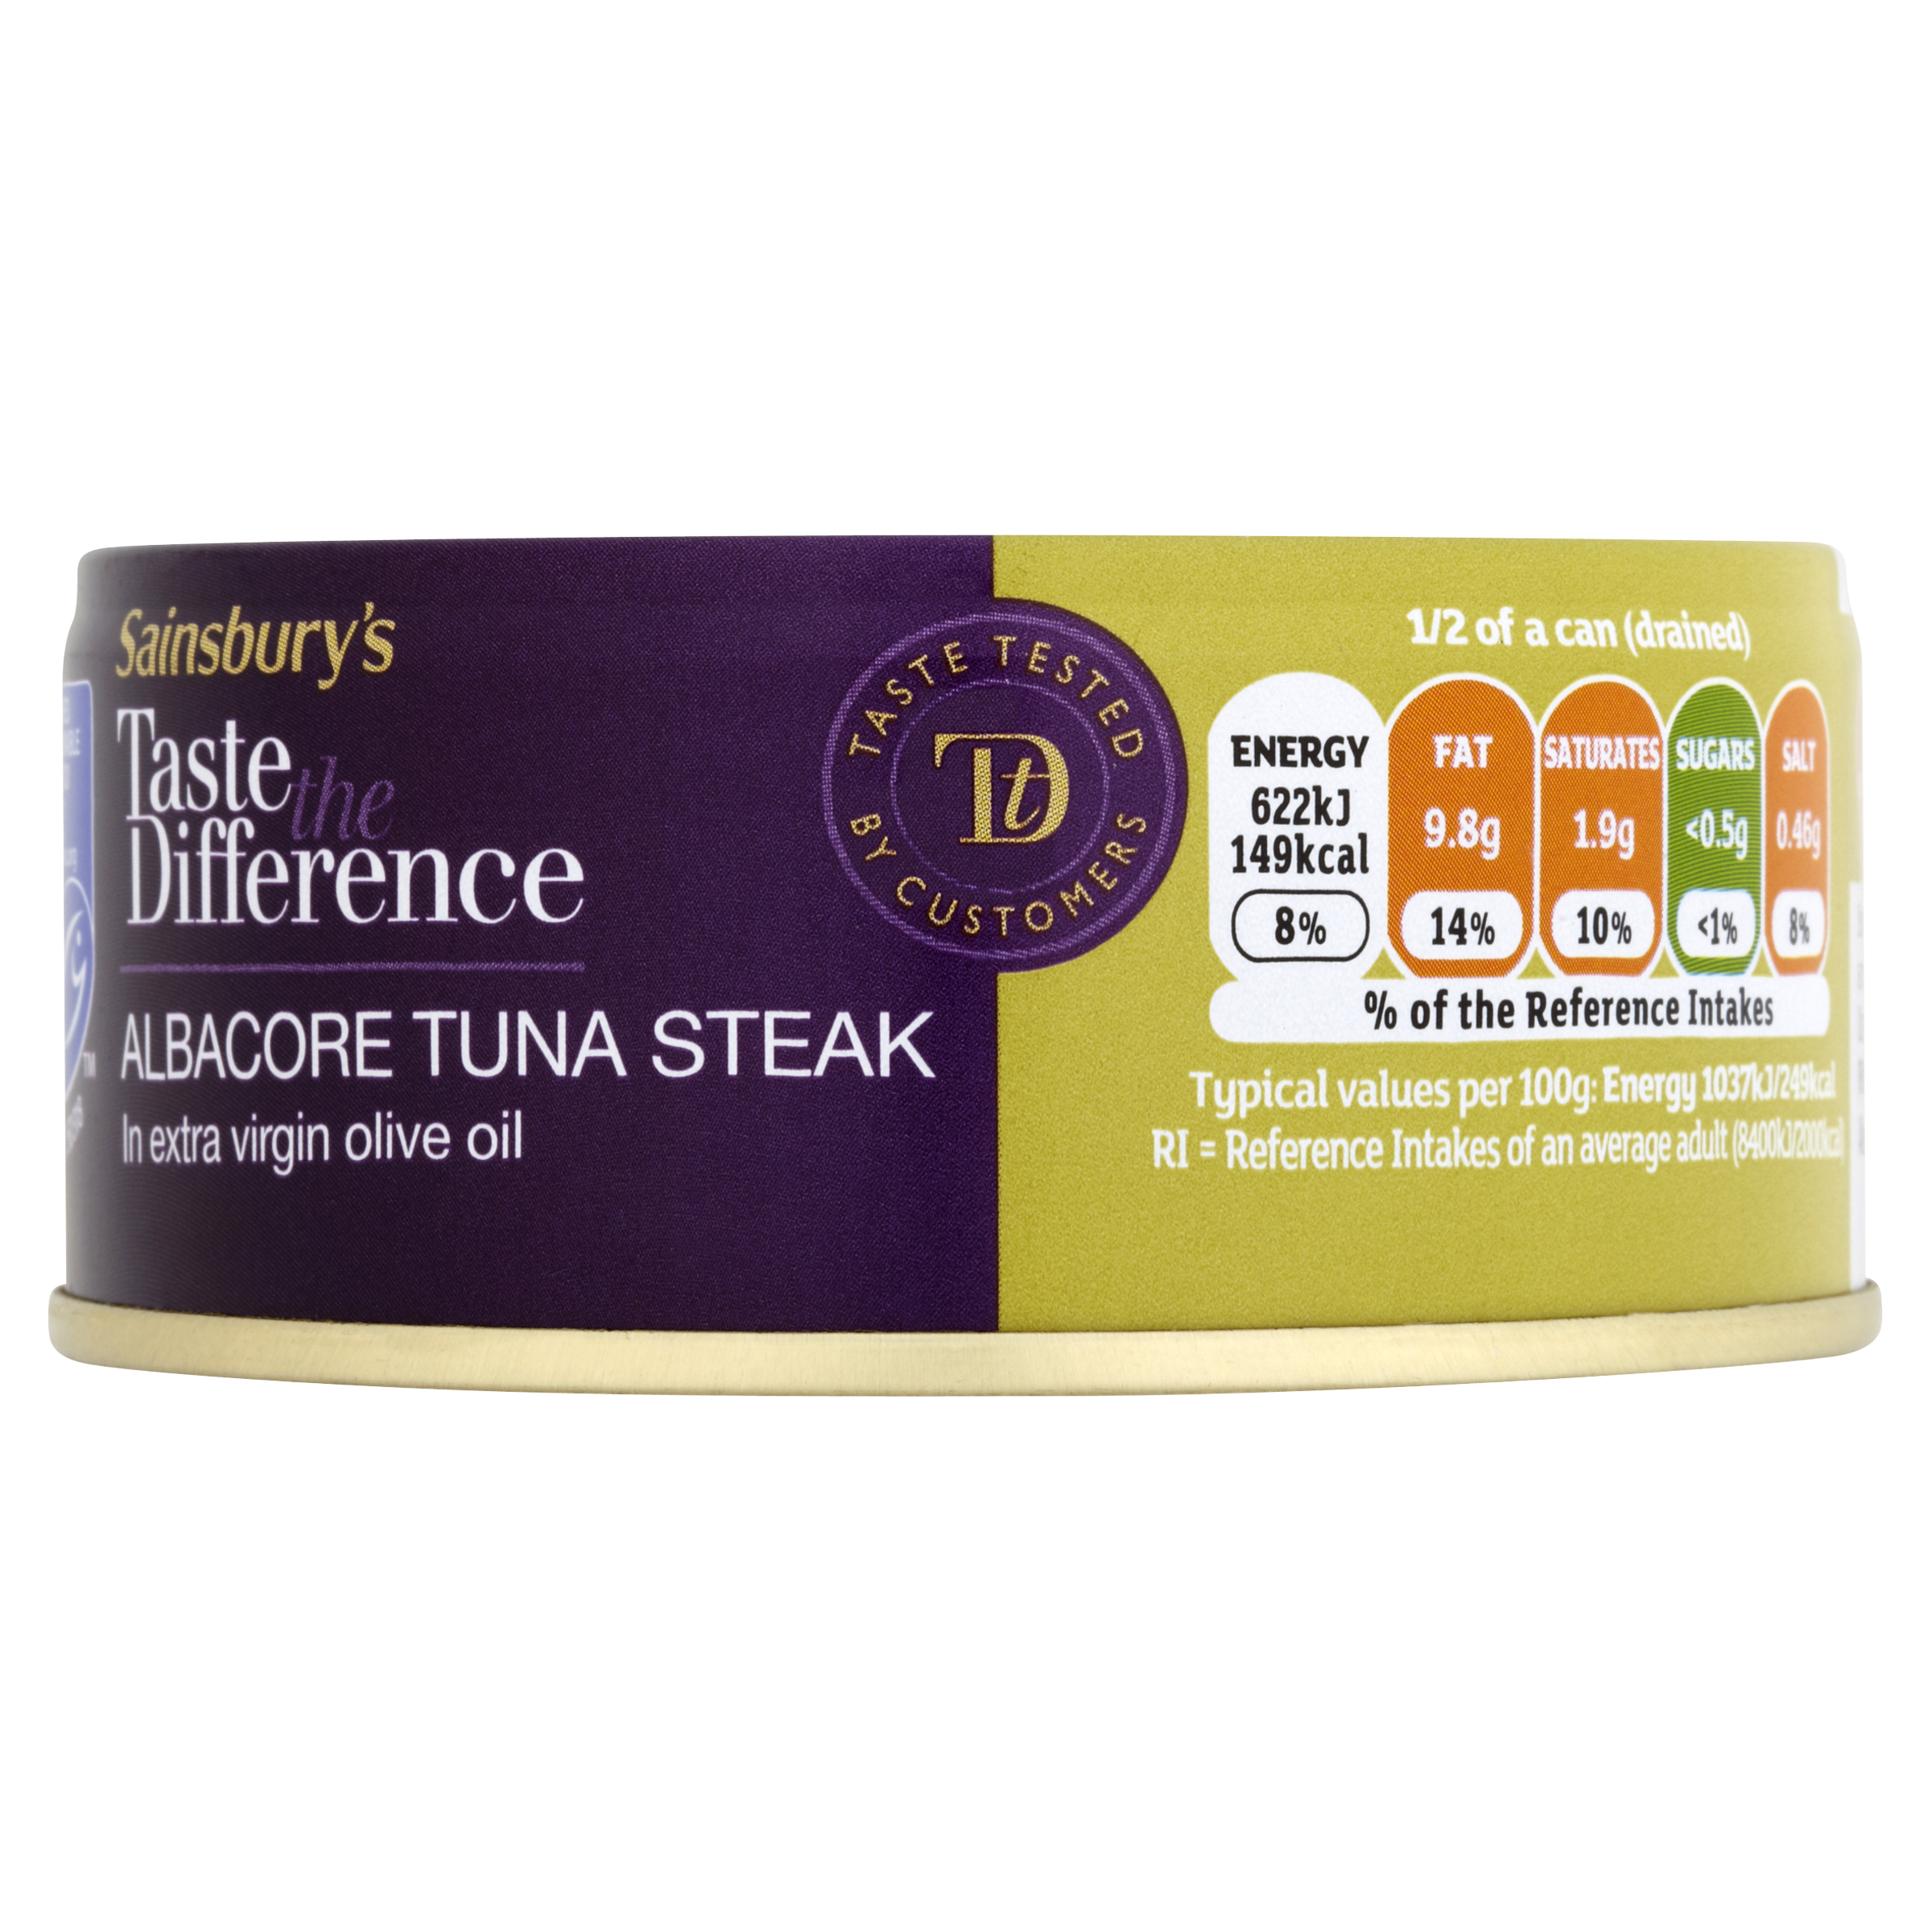 Albacore Tuna Steak In Extra Virgin Olive Oil, Taste the Difference 160g image